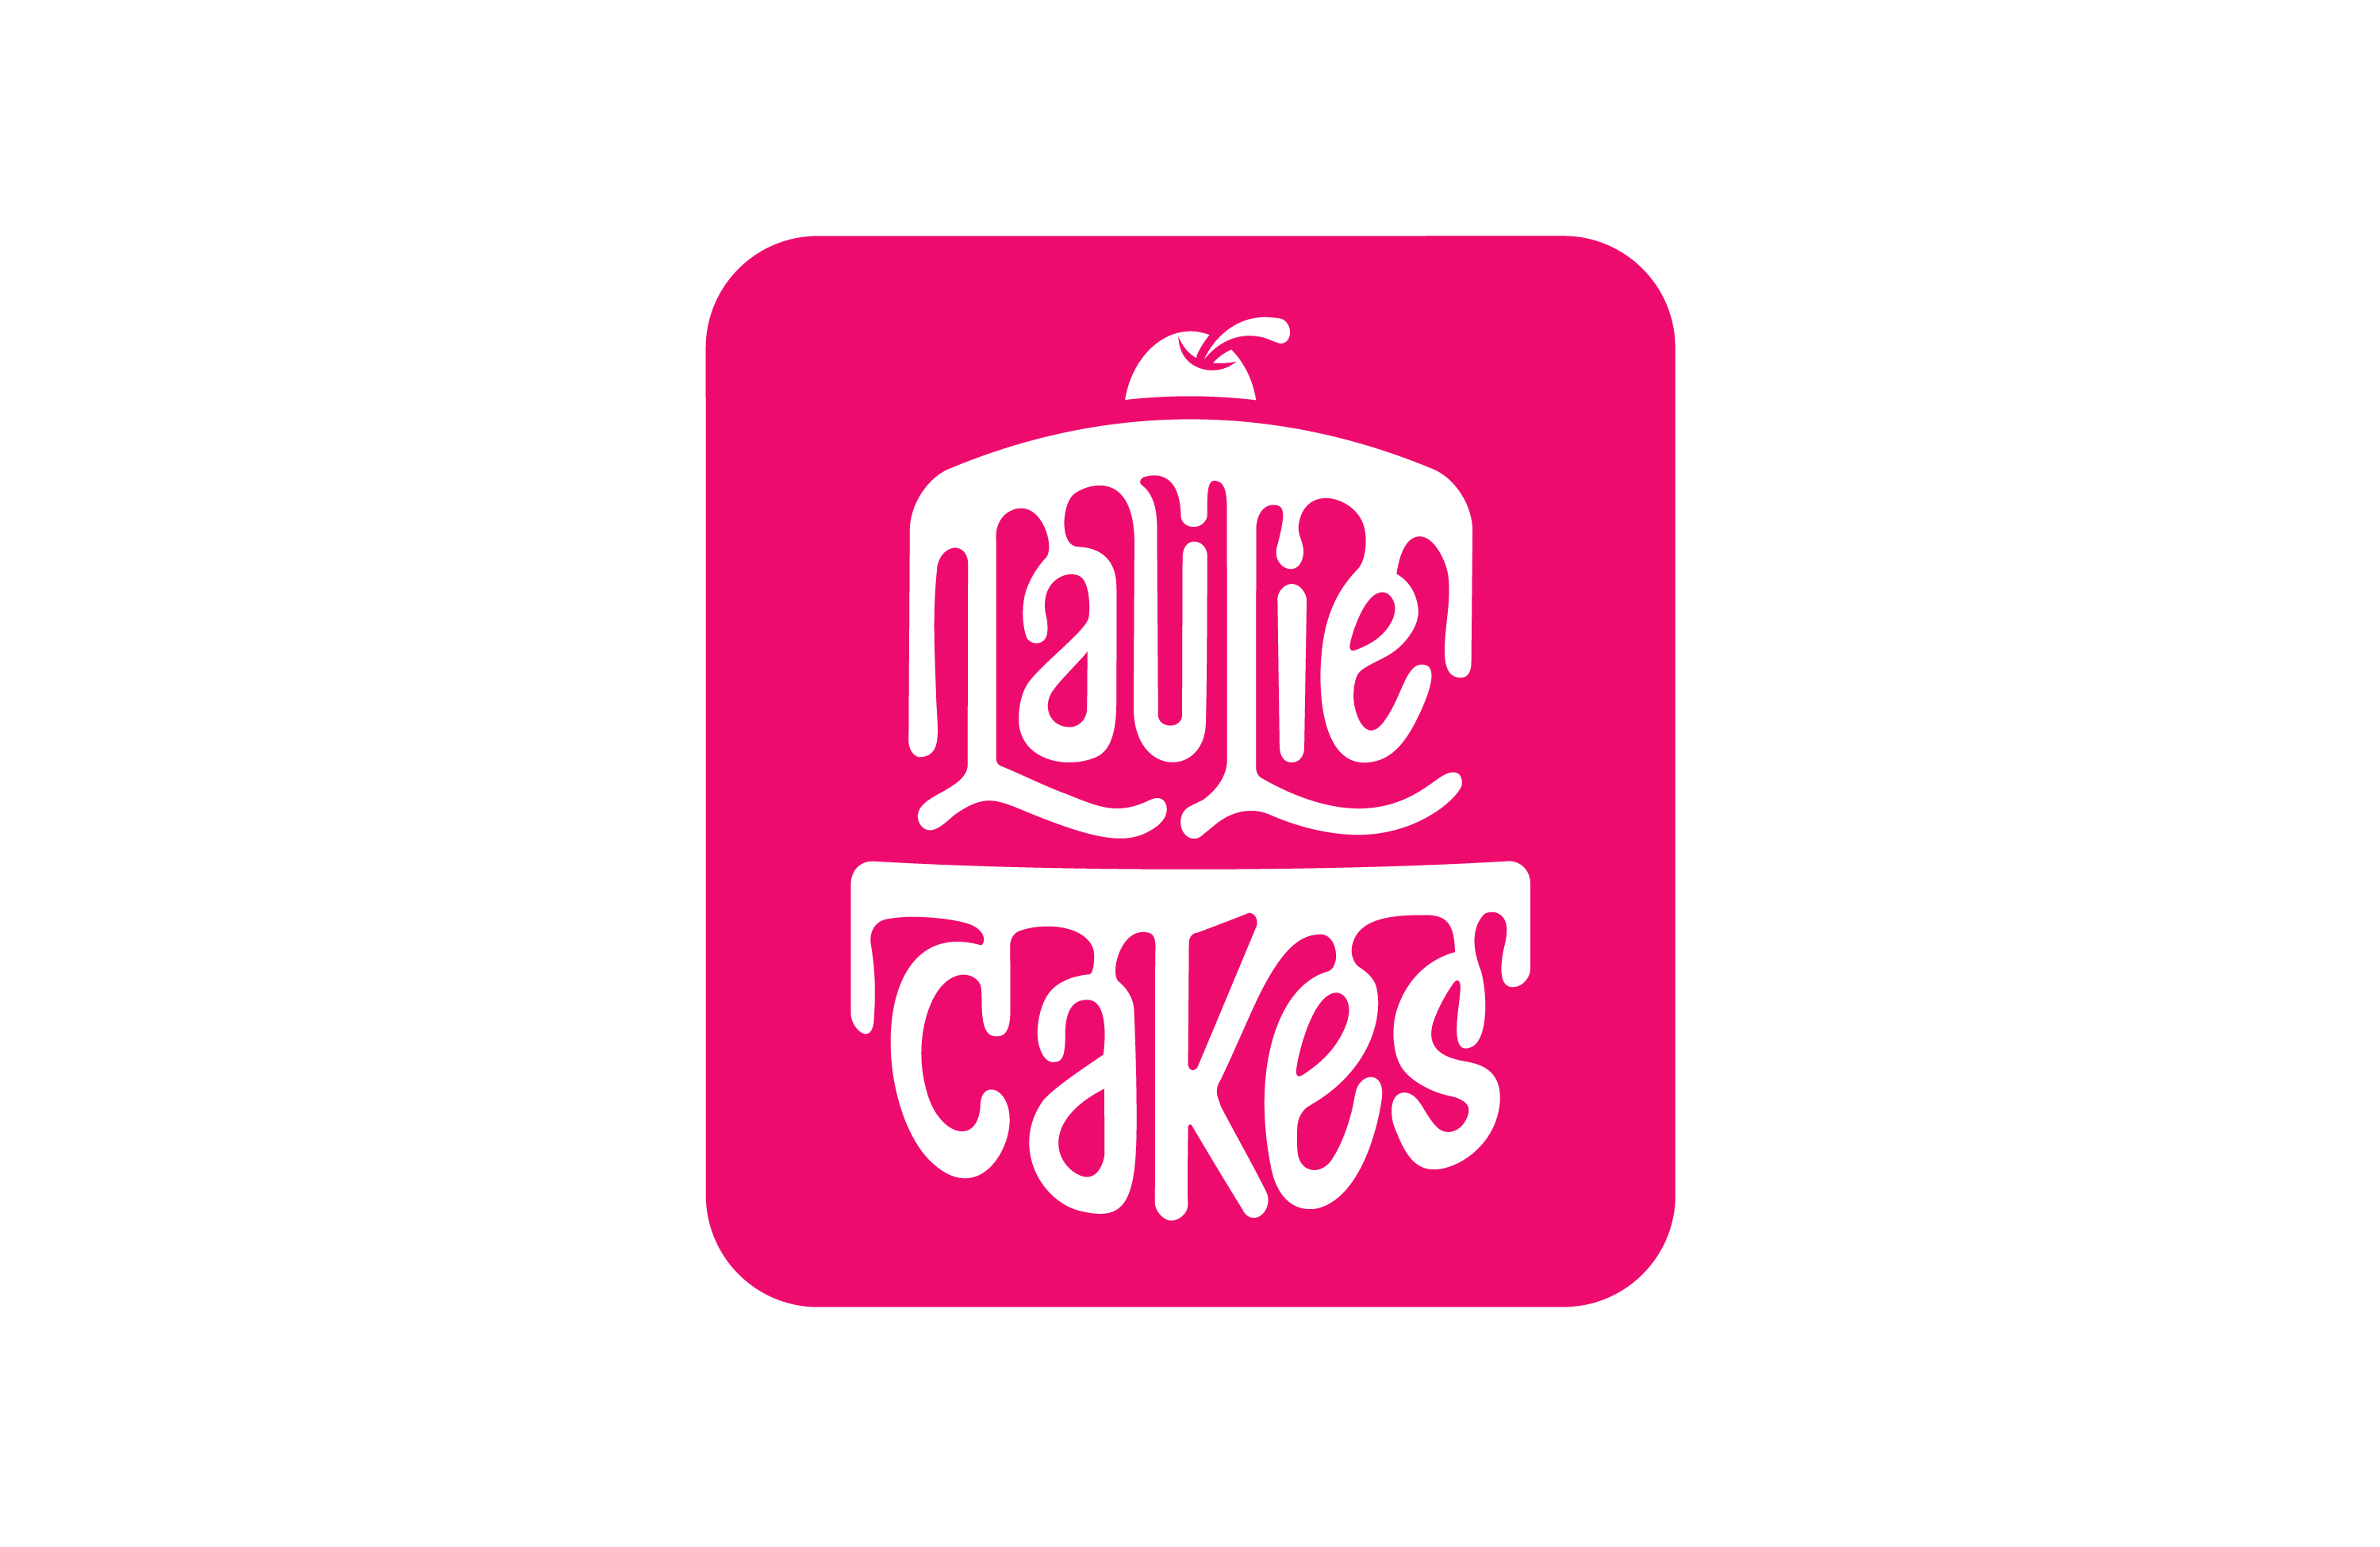 Laulie Cakes - Cover Photo